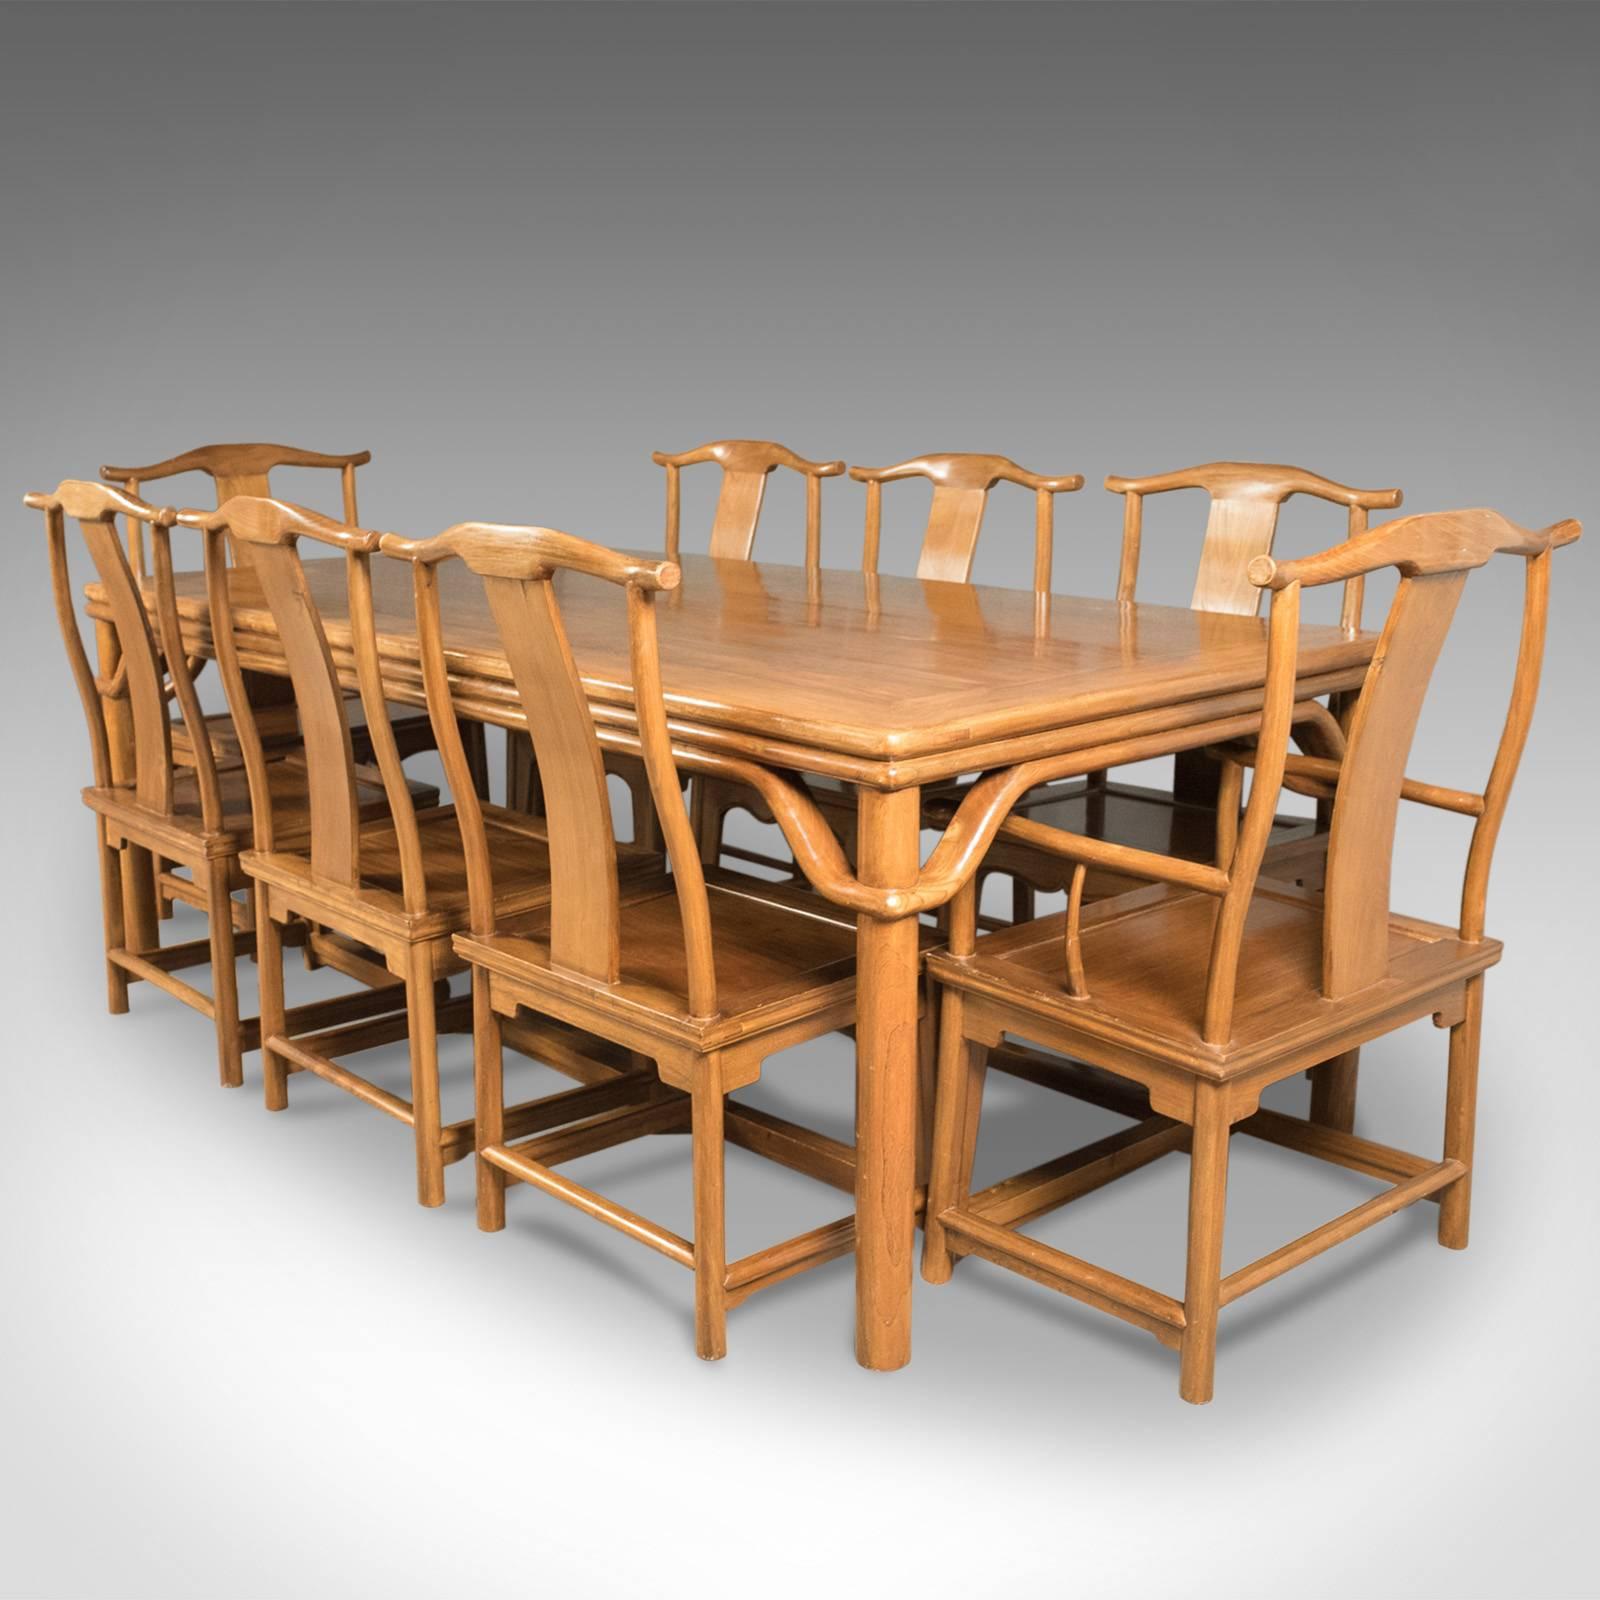 This is a superior quality dining suite from the midcentury of Classic Chinese design, comprising of a table and eight chairs in the traditional taste.

Mellow in color with good grain interest in the Chinese rosewood
The planked tabletop